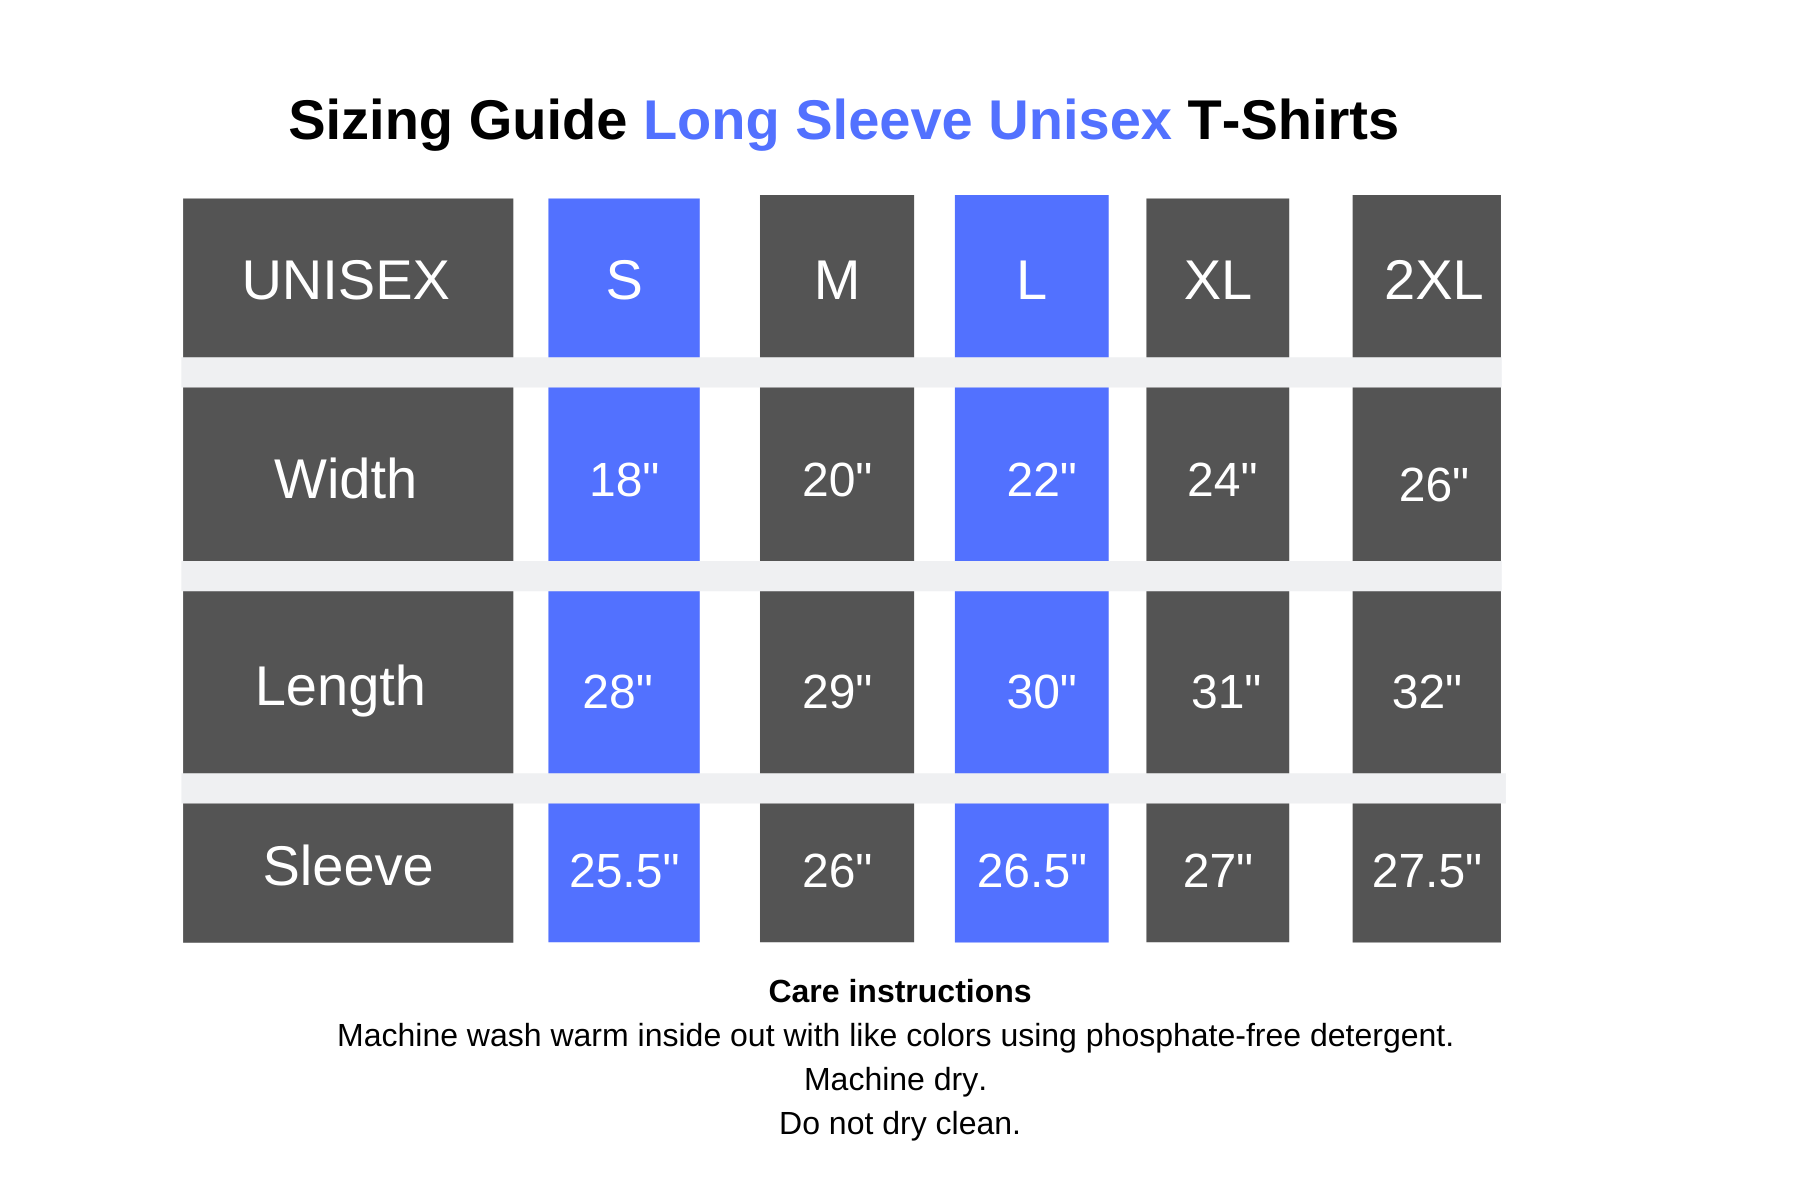 Size guide for long sleeve unisex t-shirts